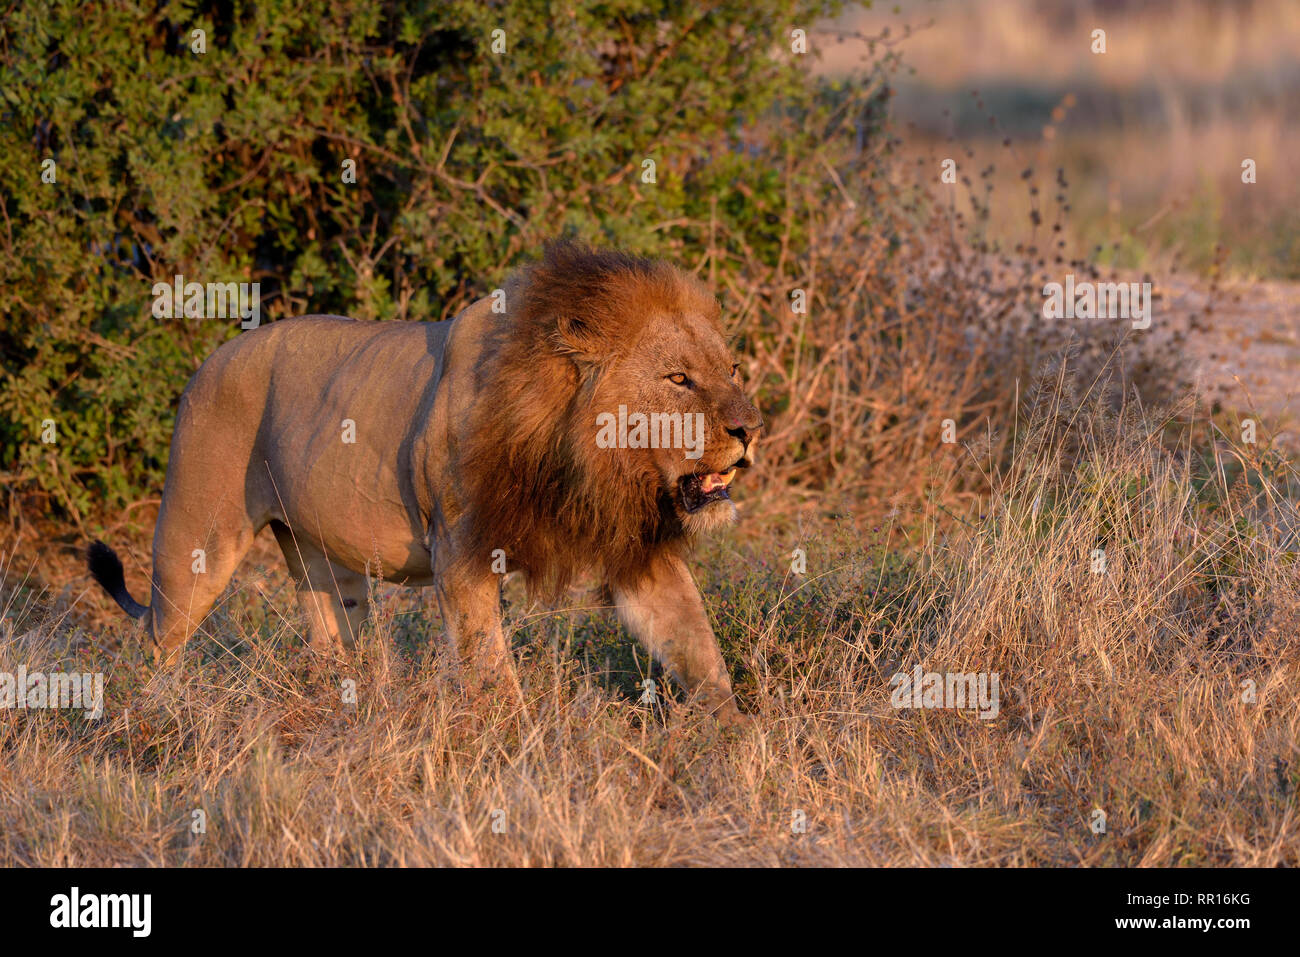 zoology, mammal (mammalia), lion (Panthera Leo), male animal, Khwai area, North-West District, Okavang, Additional-Rights-Clearance-Info-Not-Available Stock Photo